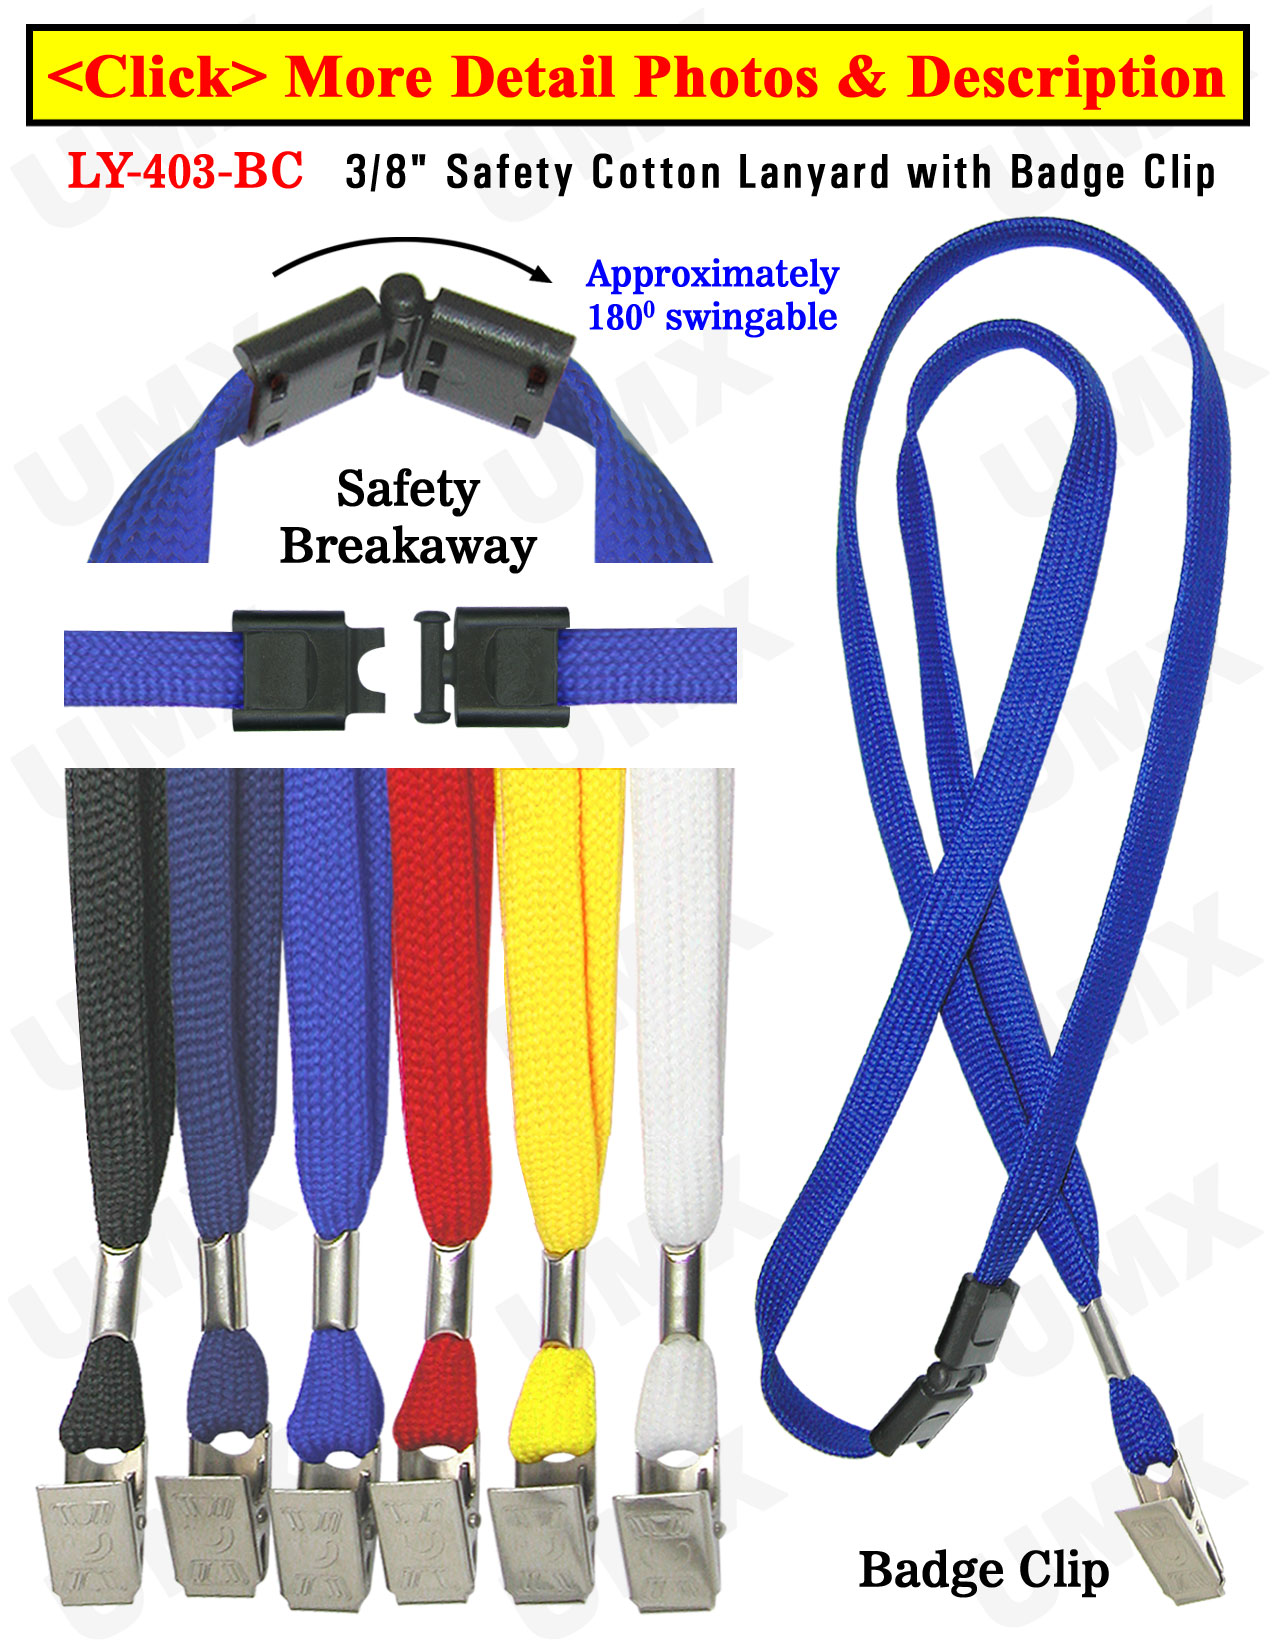 LY-403-BC 3/8" Safety Breakaway Blank Lanyards With Badge Holder Clips